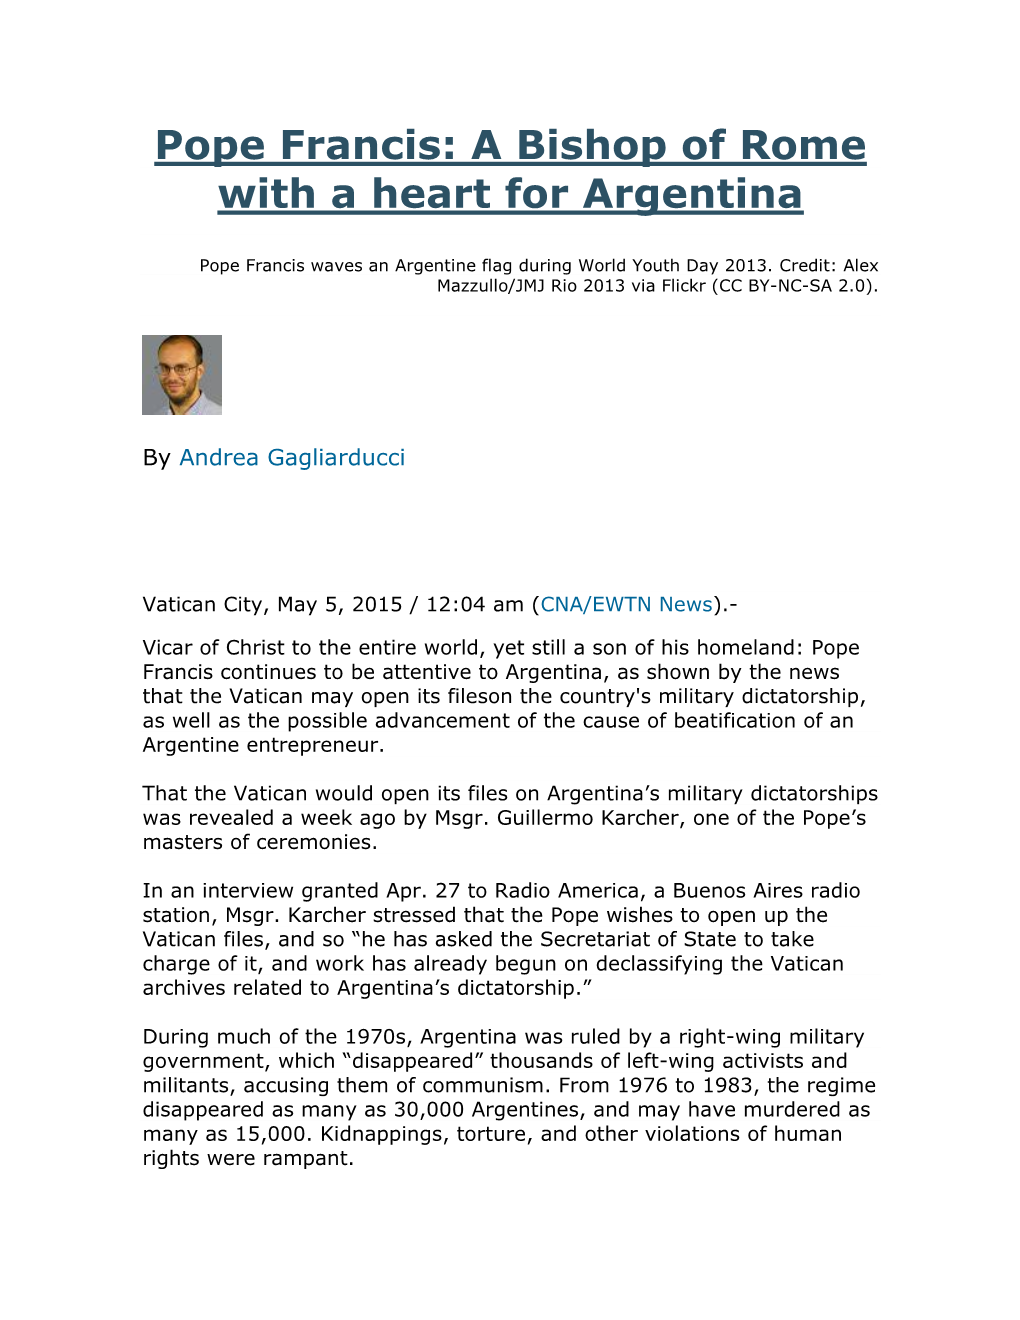 Pope Francis: a Bishop of Rome with a Heart for Argentina